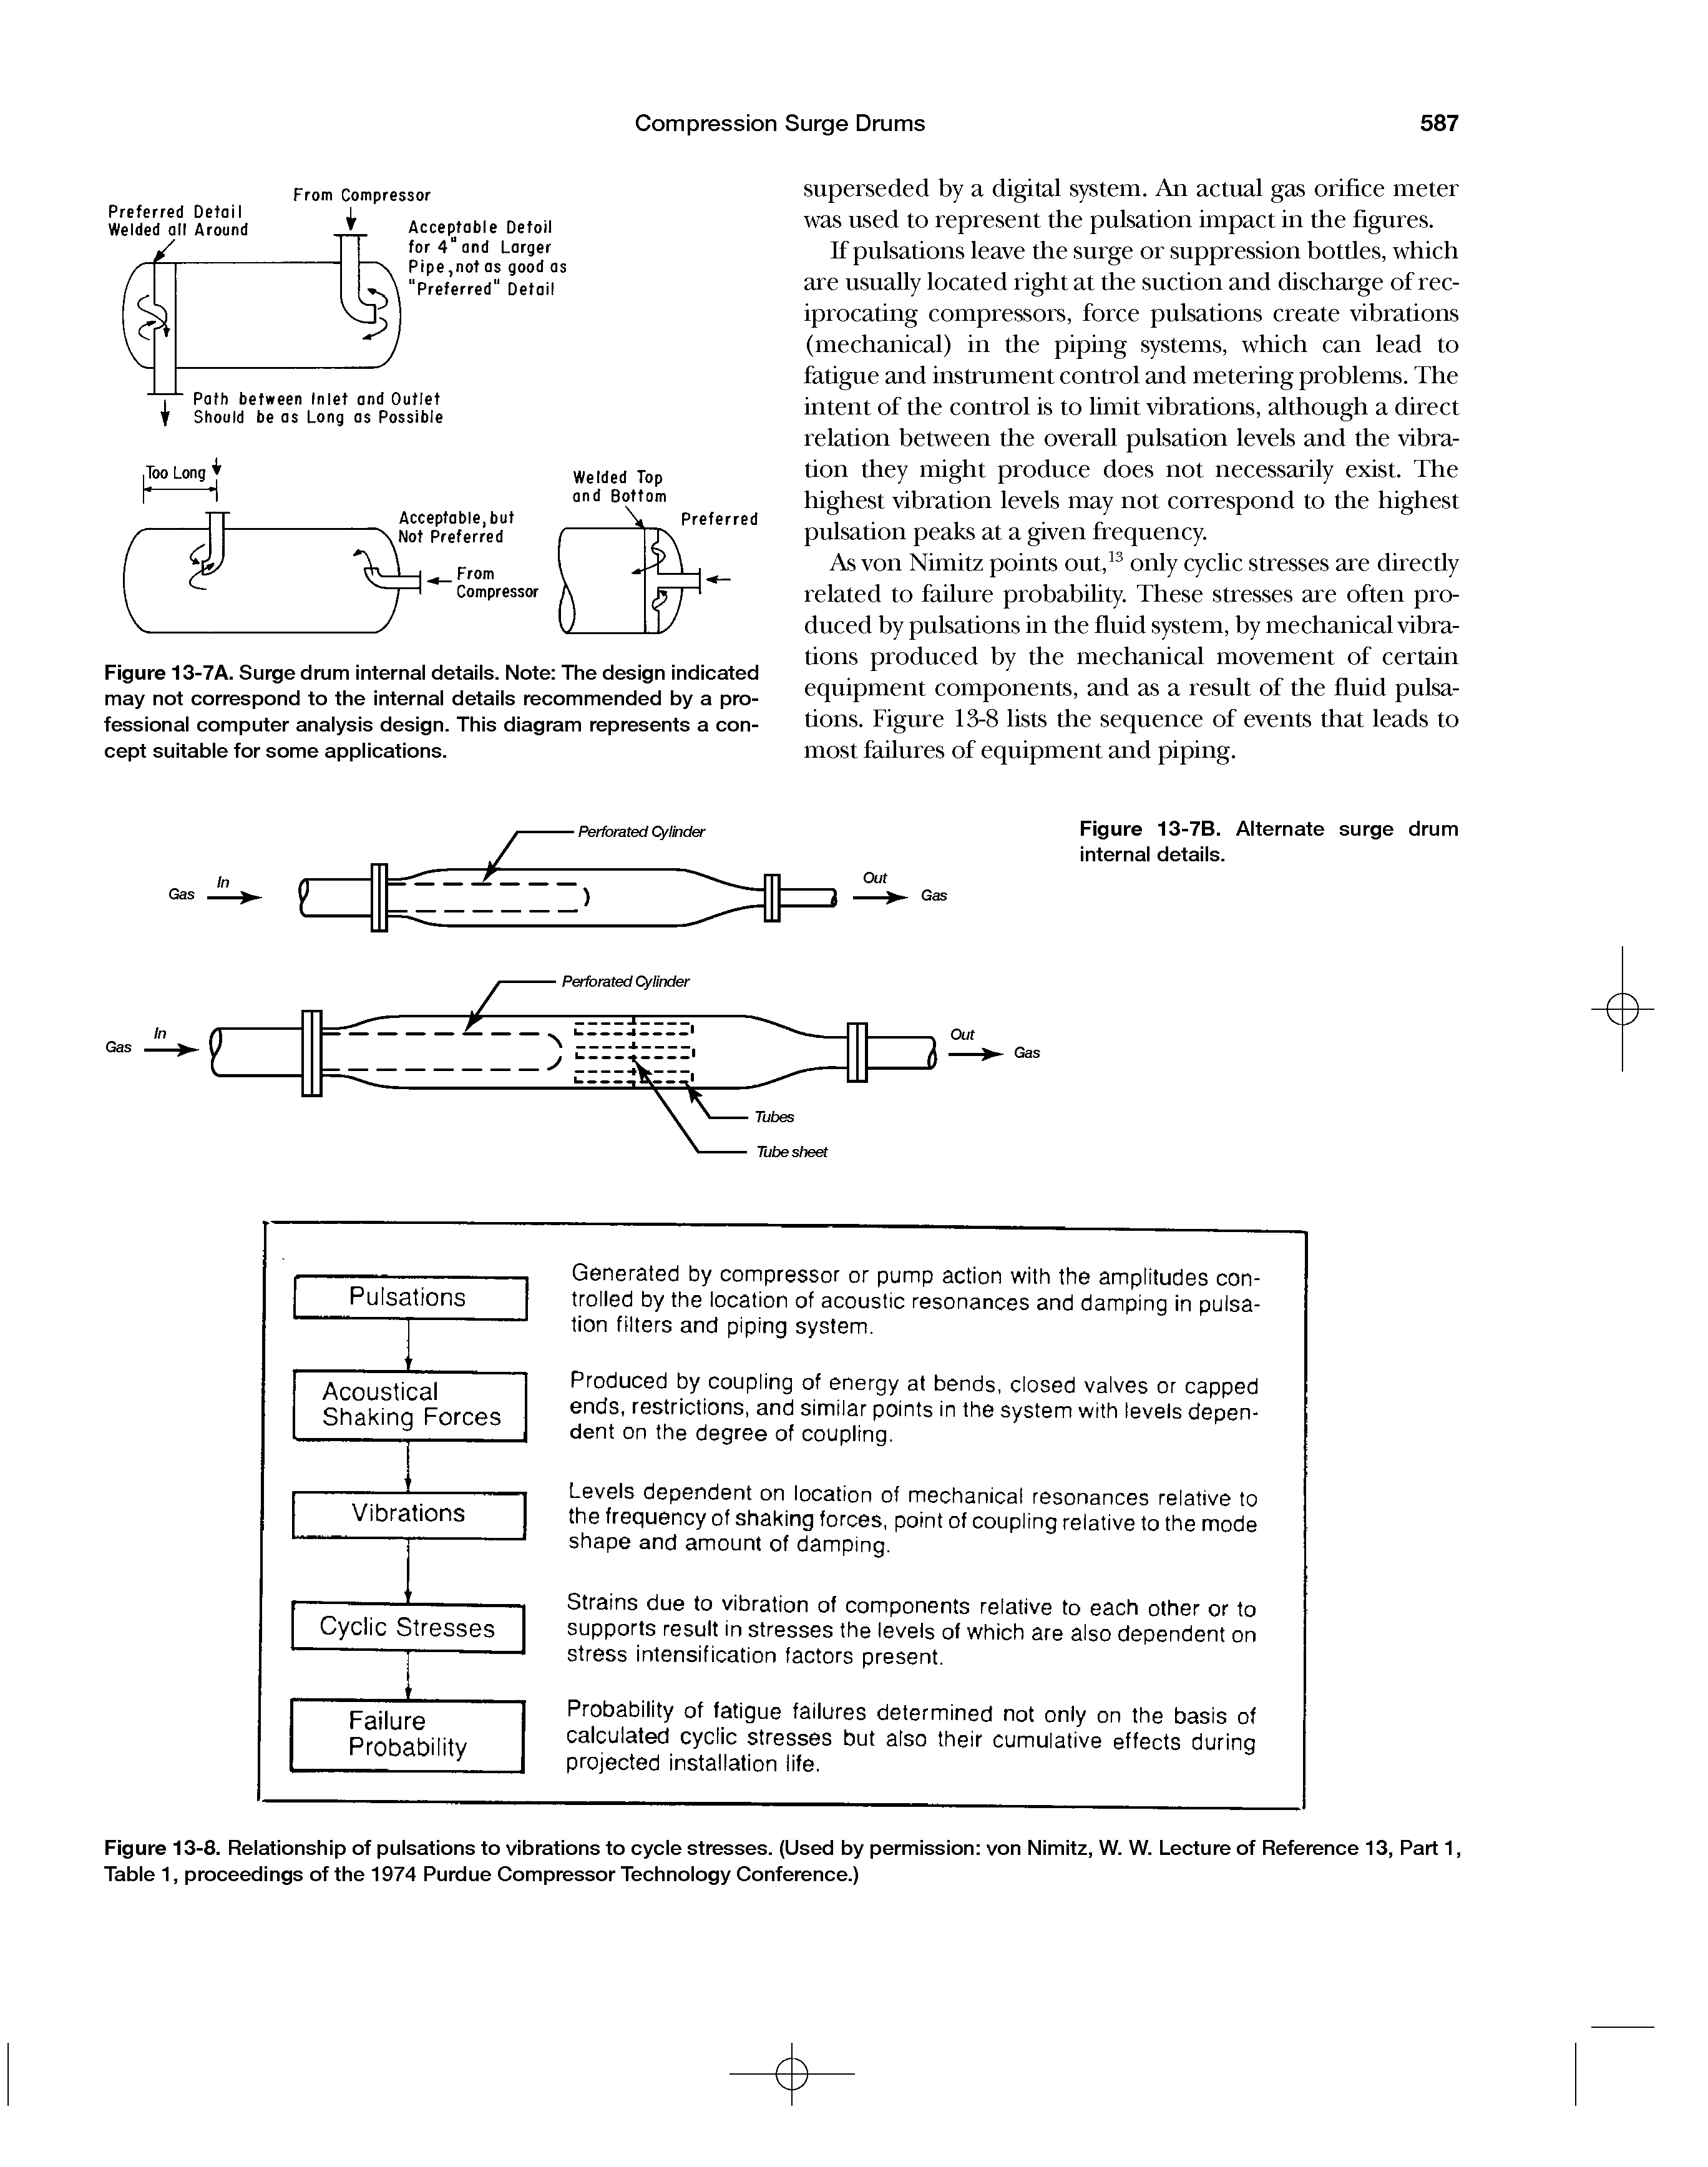 Figure 13-8. Relationship of pulsations to vibrations to cycle stresses. (Used by permission von Nimitz, W. W. Lecture of Reference 13, Part 1, Table 1, proceedings of the 1974 Purdue Compressor Technology Conference.)...